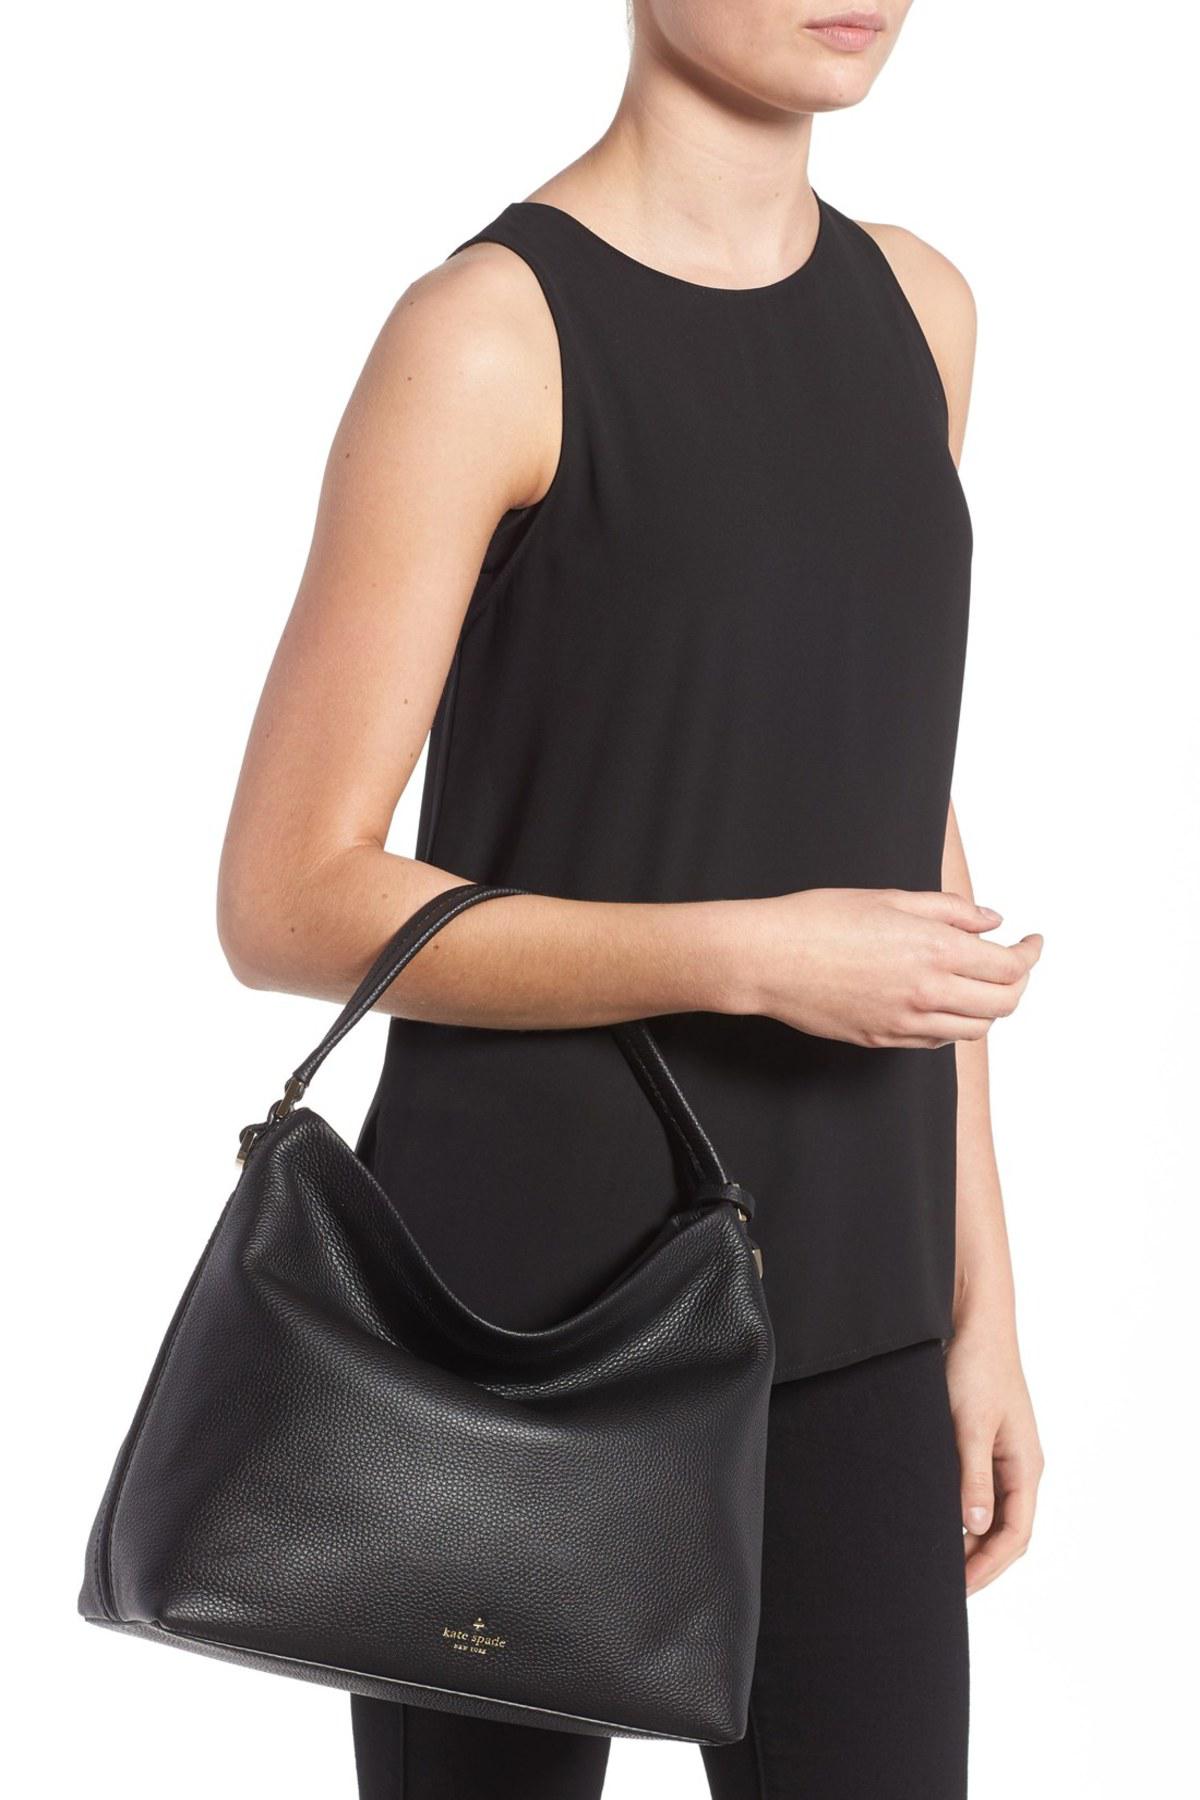 Kate Spade 'orchard Street - Small Natalya' Pebbled Leather Hobo Bag in  Black | Lyst